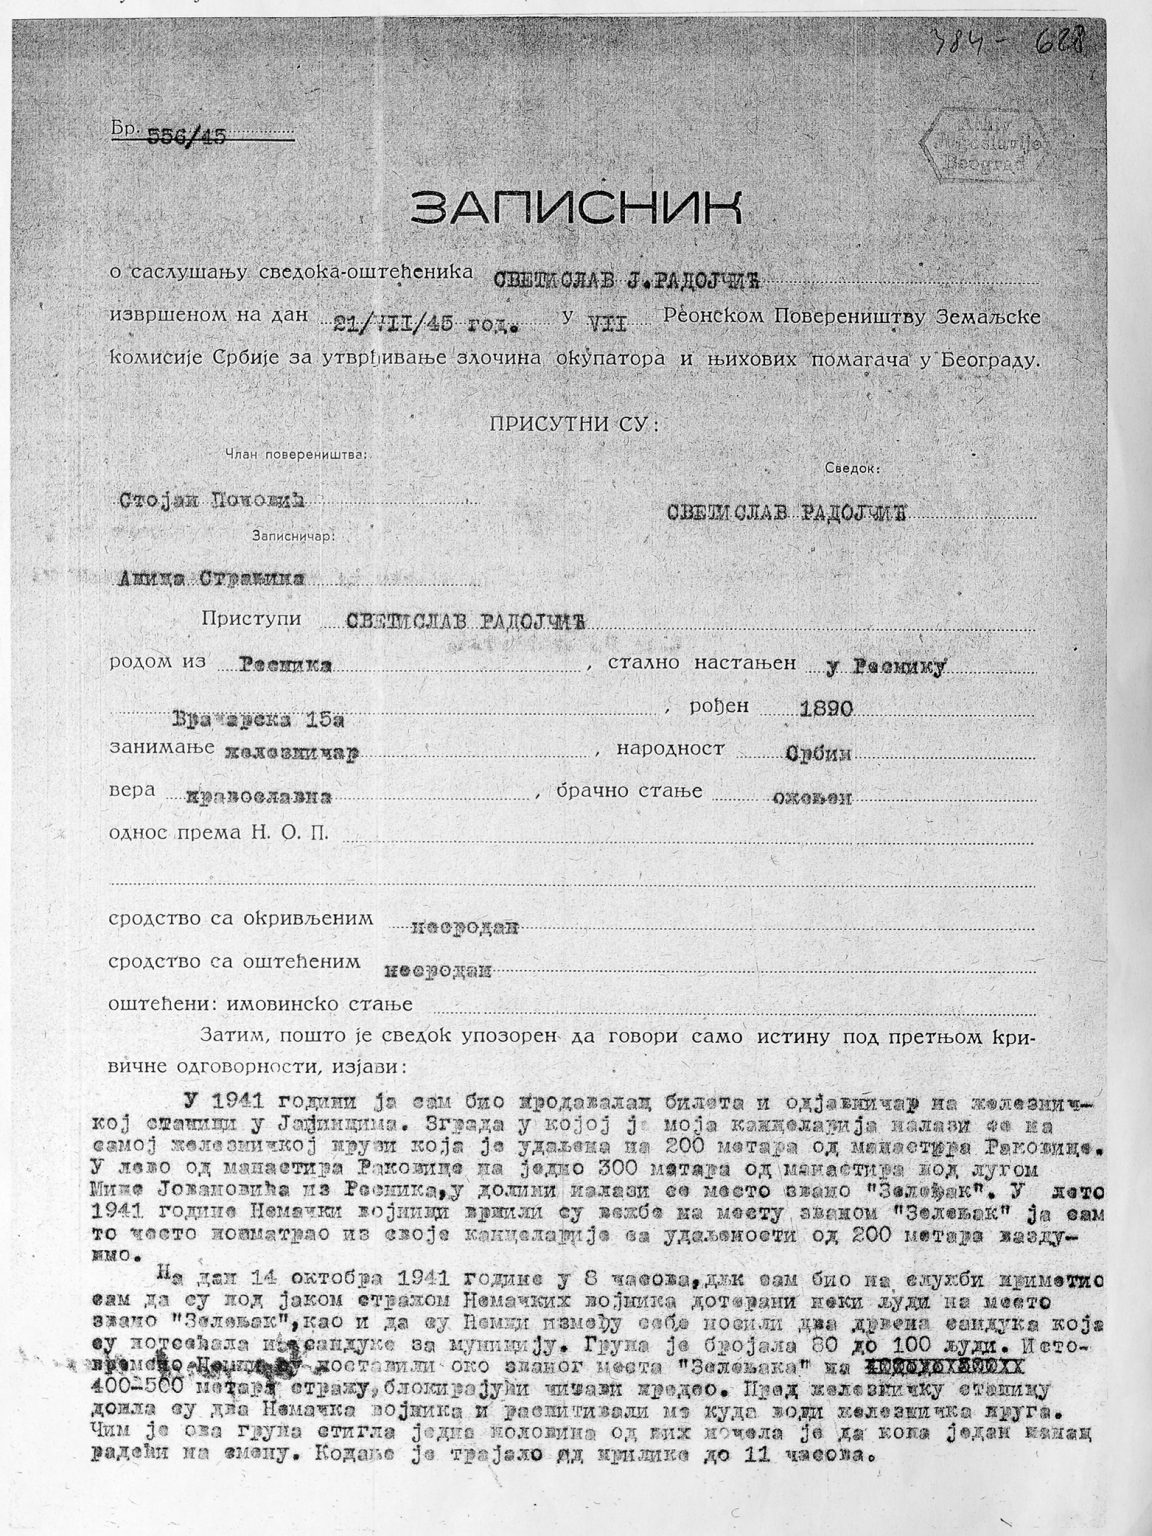 Record of testimony by Svetislav Radojčić, wartime dispatcher of train station Jajinci, about 300 meters from the site of mass execution at Rakovica. The eyewitness has described the event in detail, from the arrival of Jewish hostages until the executions. AJ, 110-384-628